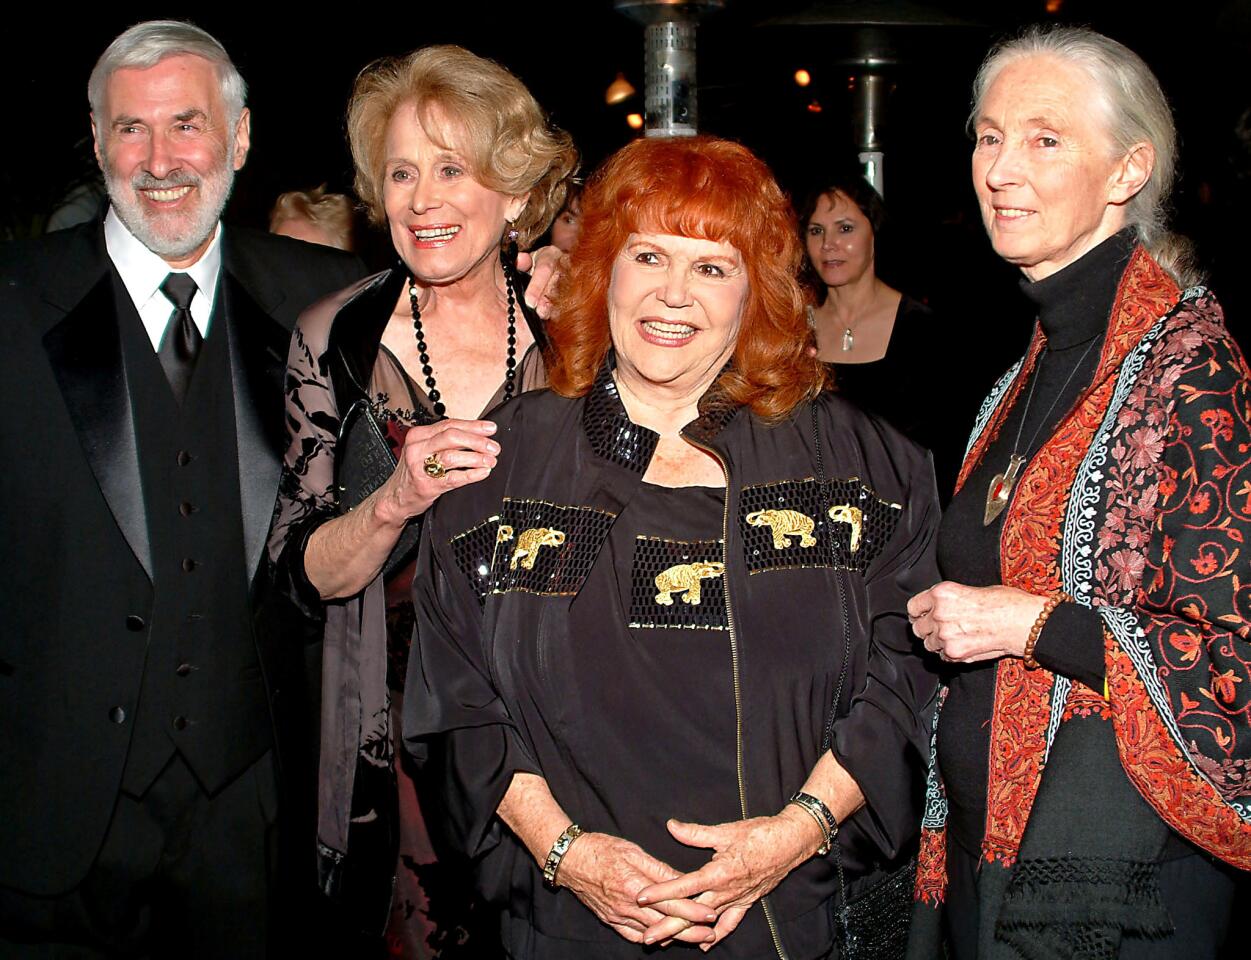 From left are shown Dr. Elliot Katz, Gretchen Wyler, Pat Derby and Dr. Jane Goodall at the In Defense of Animals Guardian Awards Fundraiser at Paramount Studios in Hollywood in 2004.